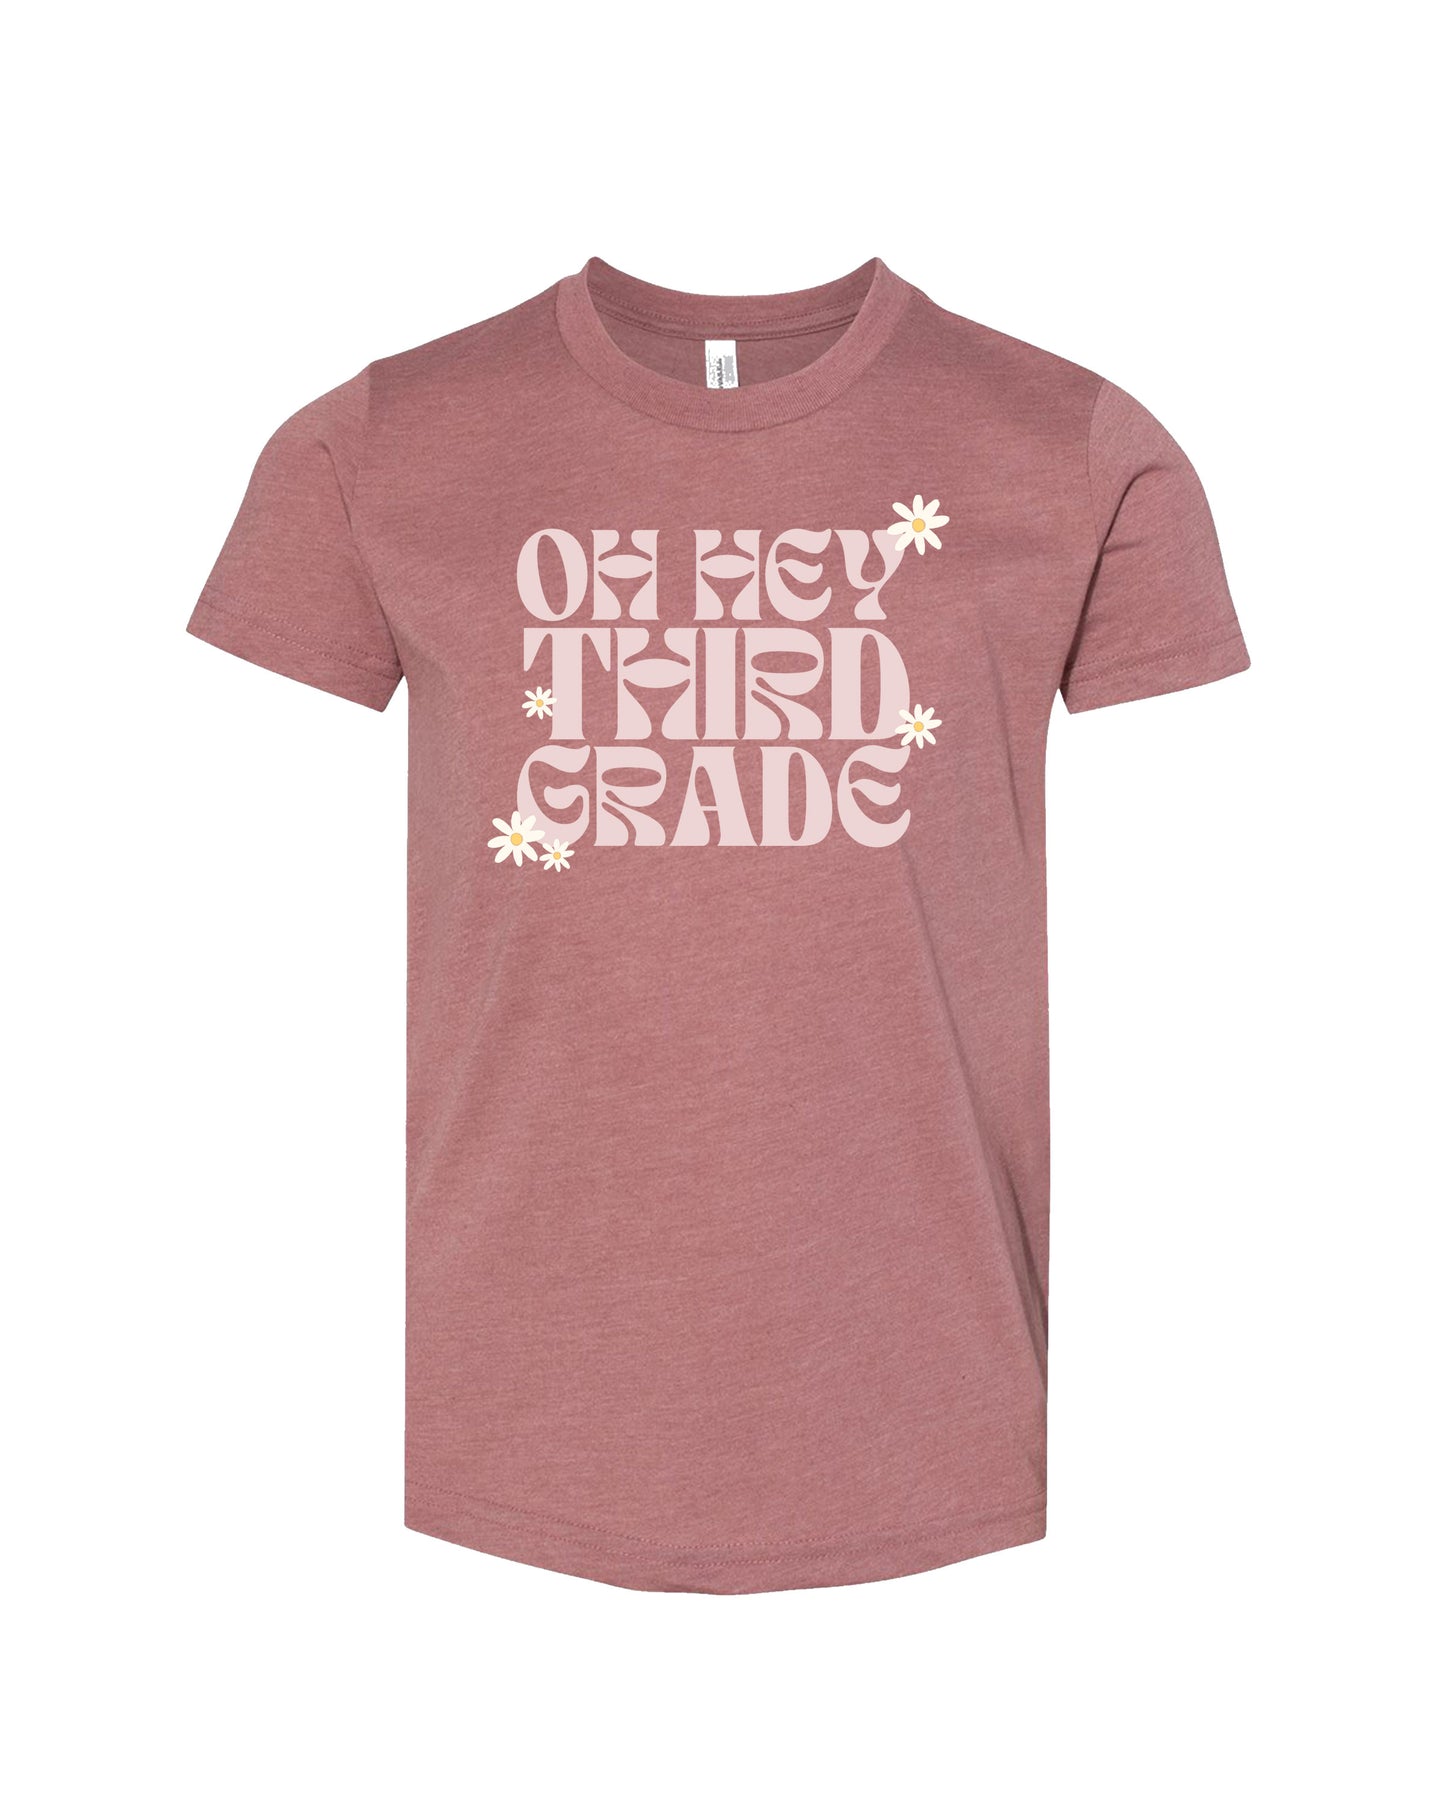 Oh Hey Grade | Girls Tee-Kids Tees-Sister Shirts-Sister Shirts, Cute & Custom Tees for Mama & Littles in Trussville, Alabama.